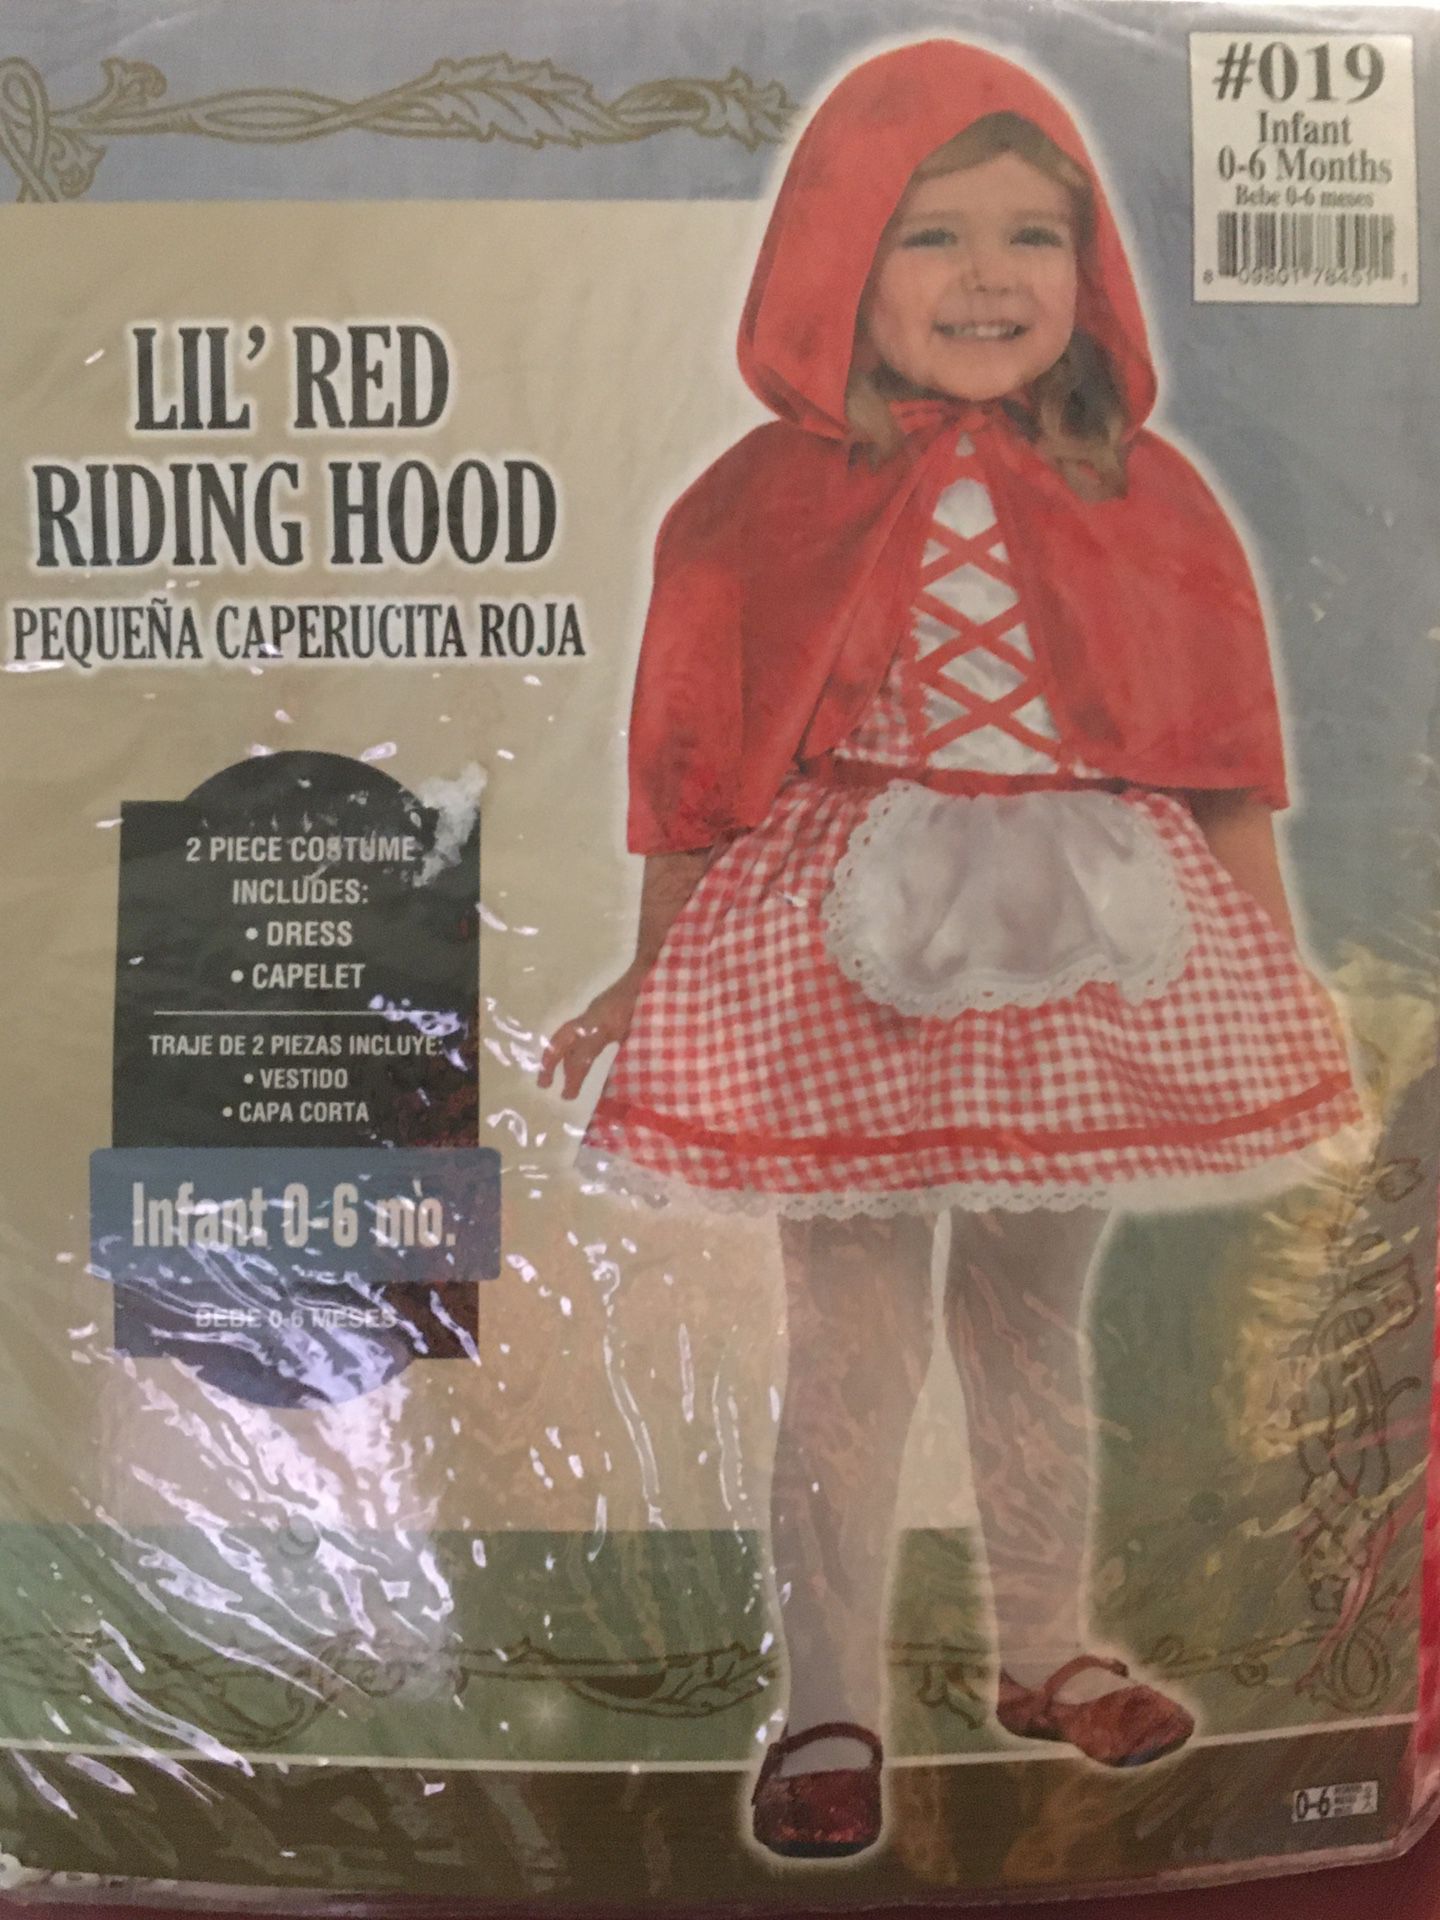 Infant Lil red riding hood costume